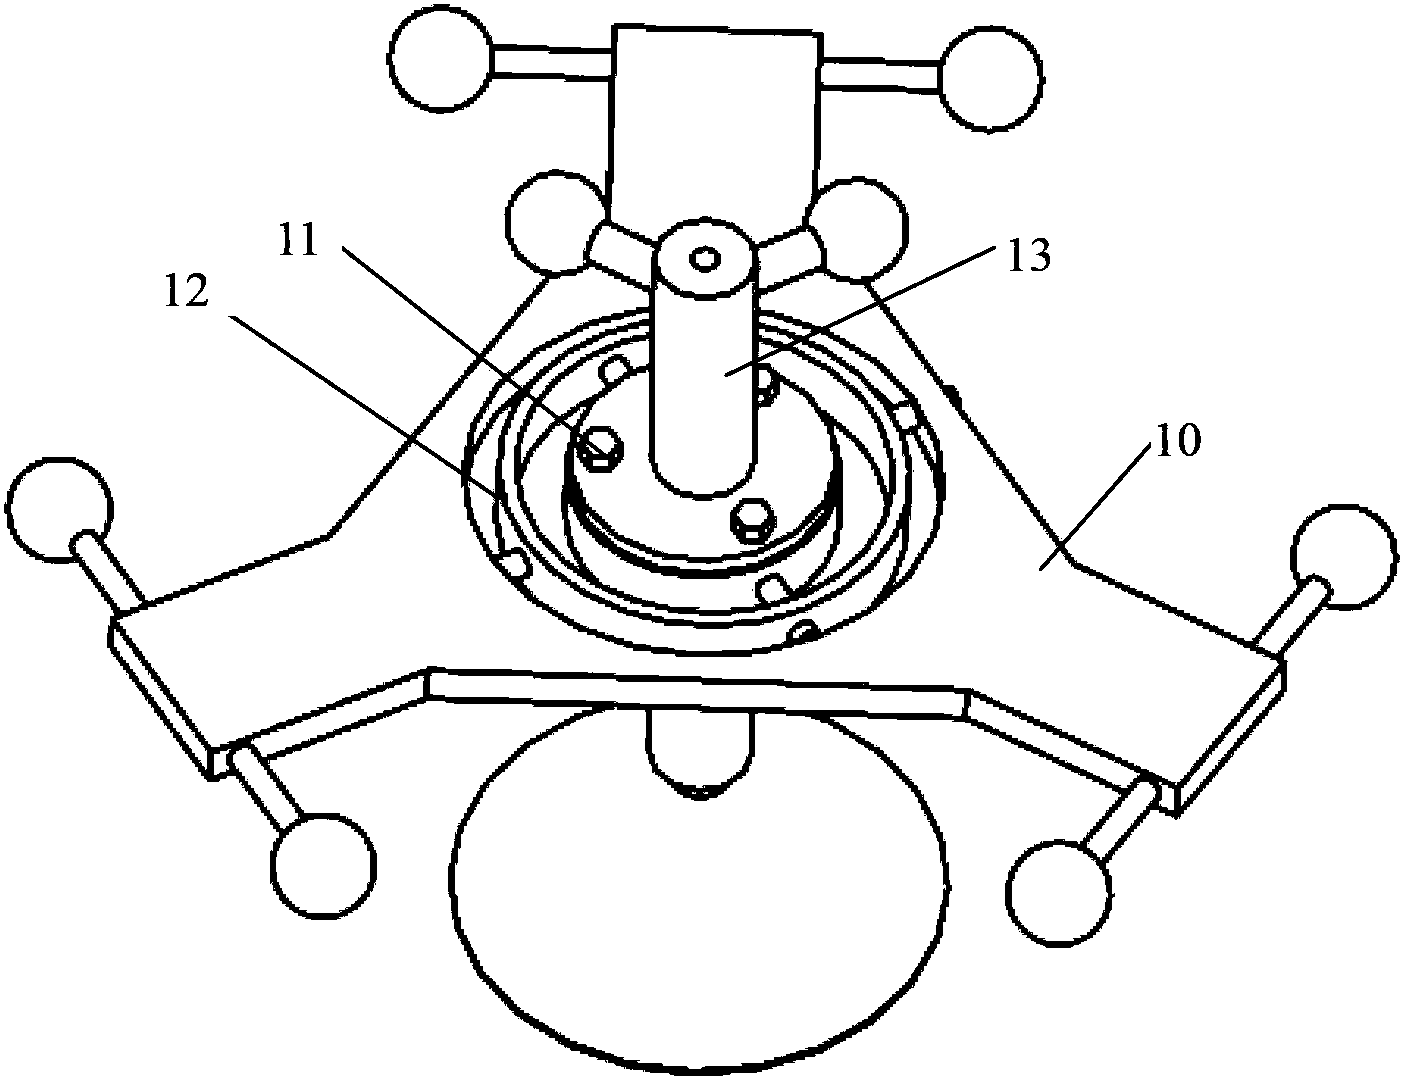 Parallel mechanism capable of realizing three-dimensional translational motion and two-dimensional rotation